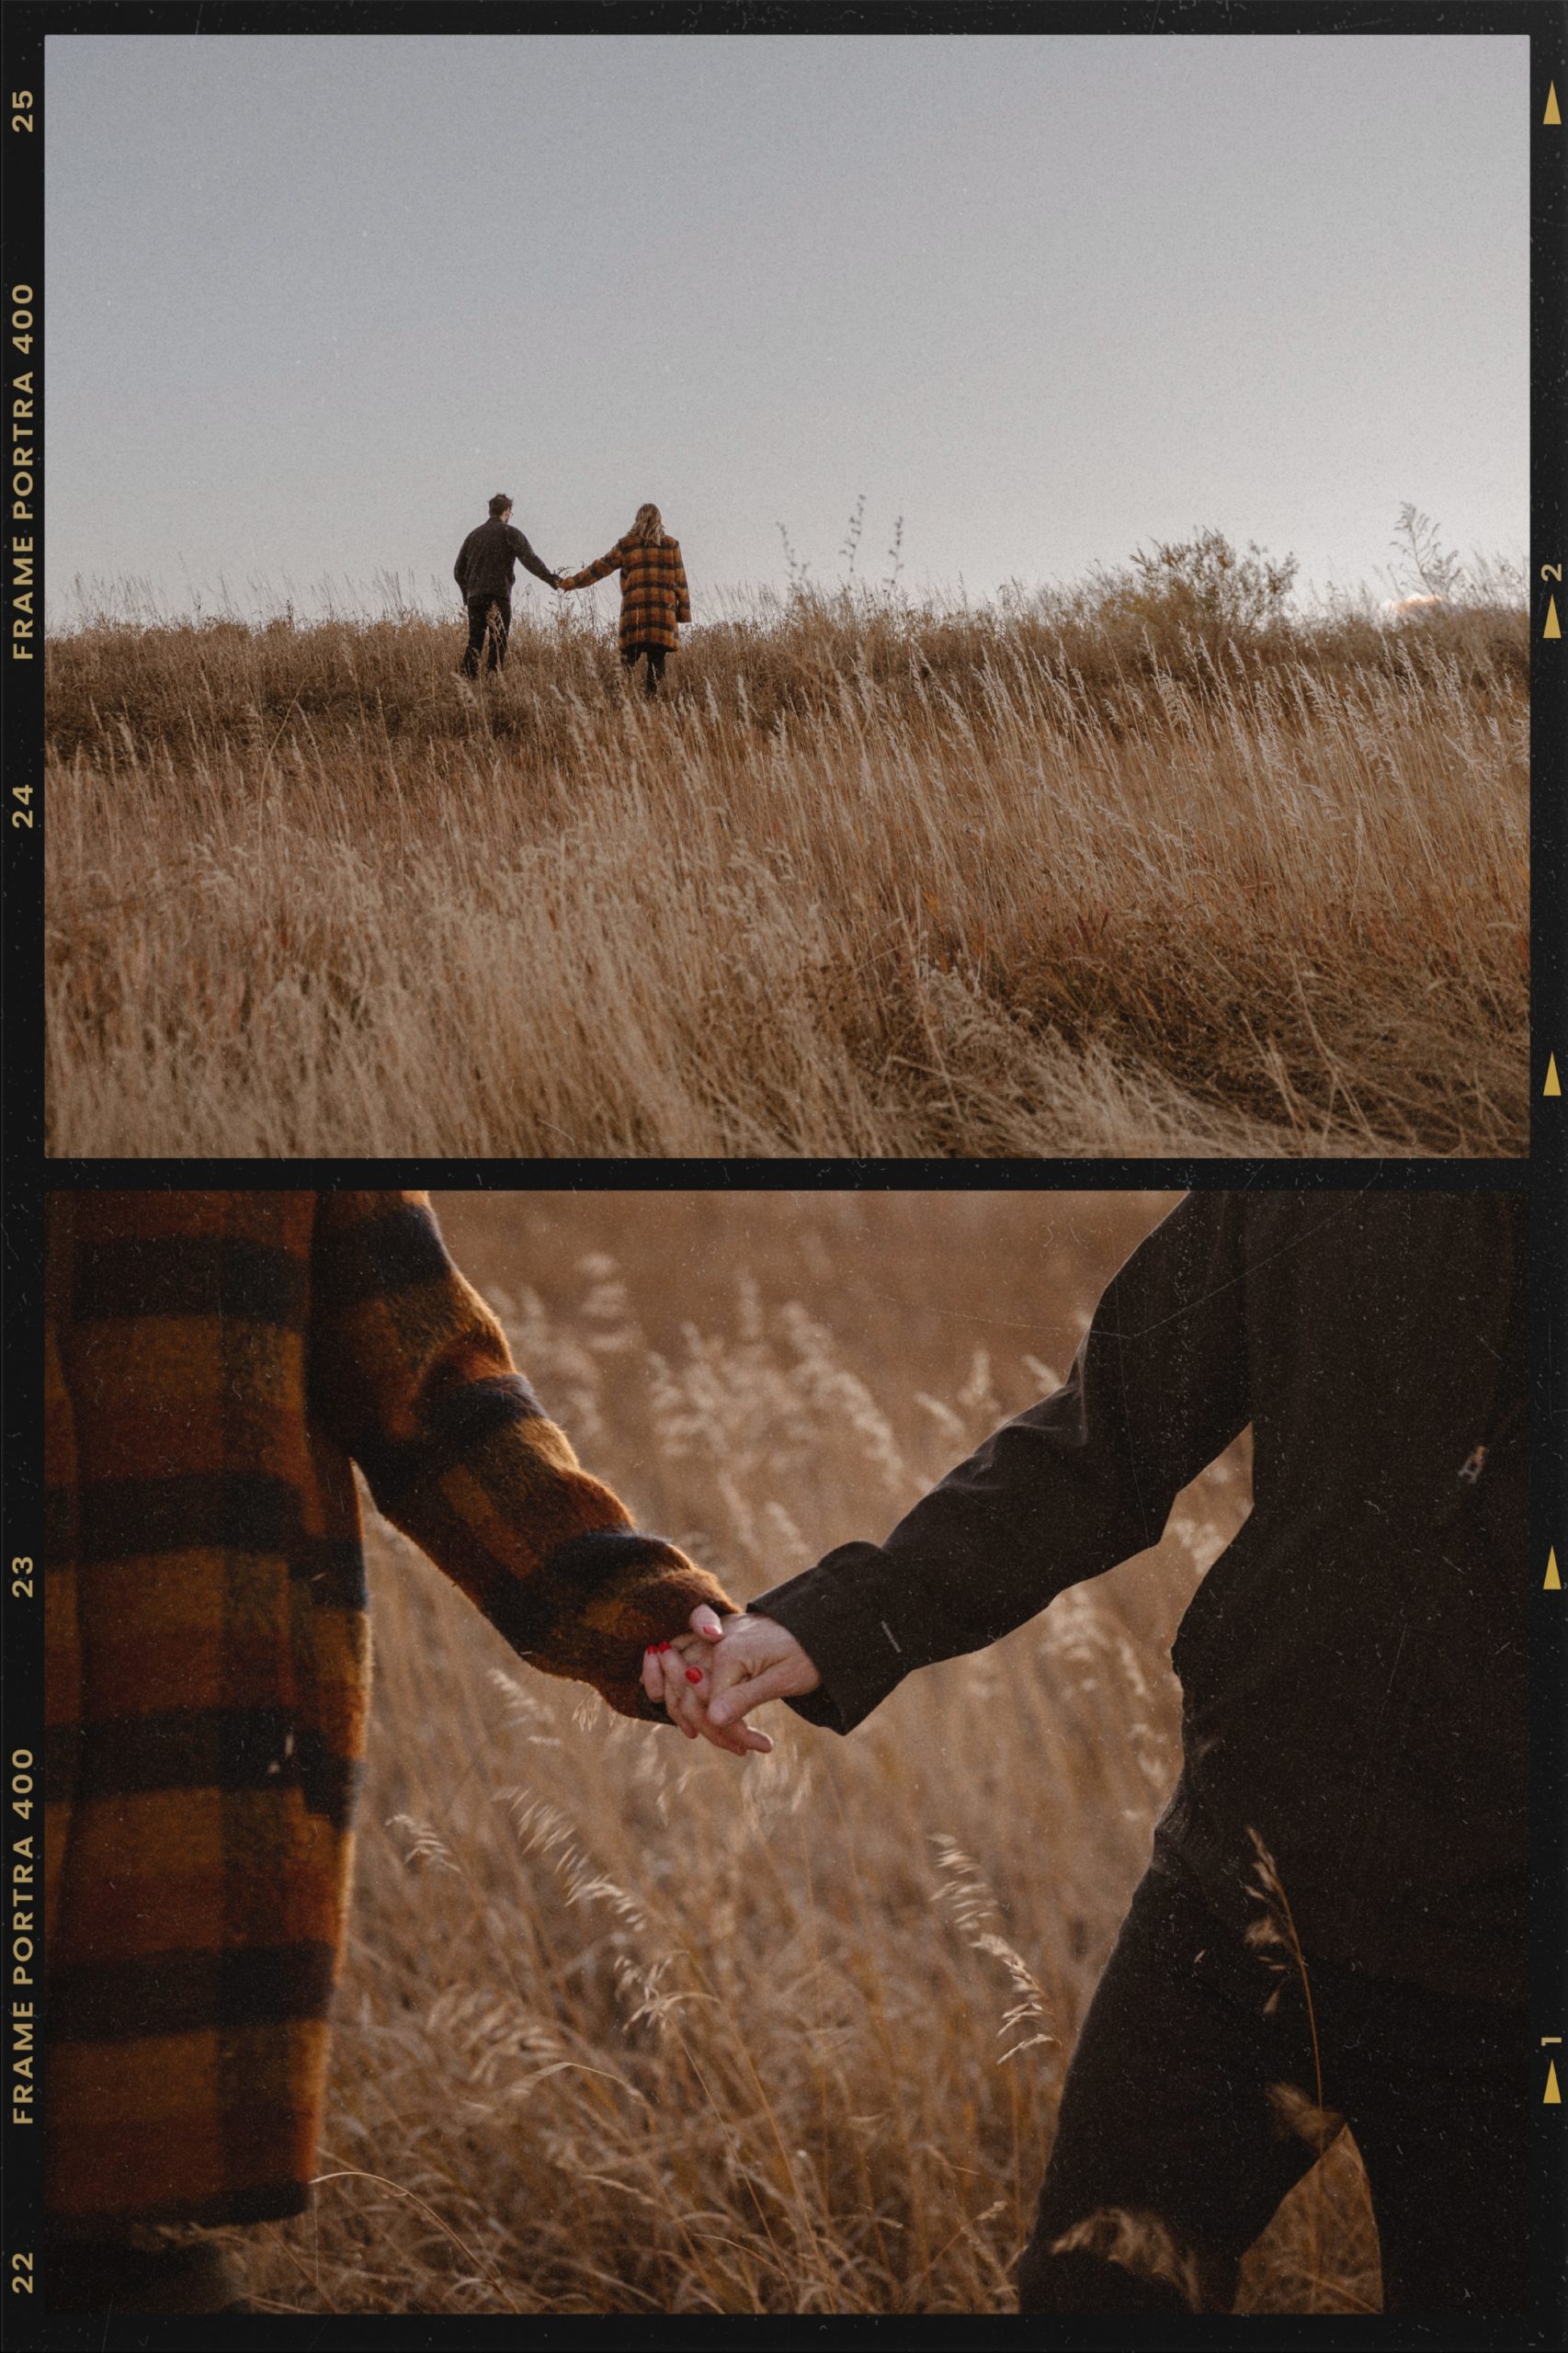 A romantic fall evening with a Colorado engaged couple as they pose for their Standley Lake engagement session. Photo by Denver Engagement photographer, Ashley Joyce Photography, copyright 2022.